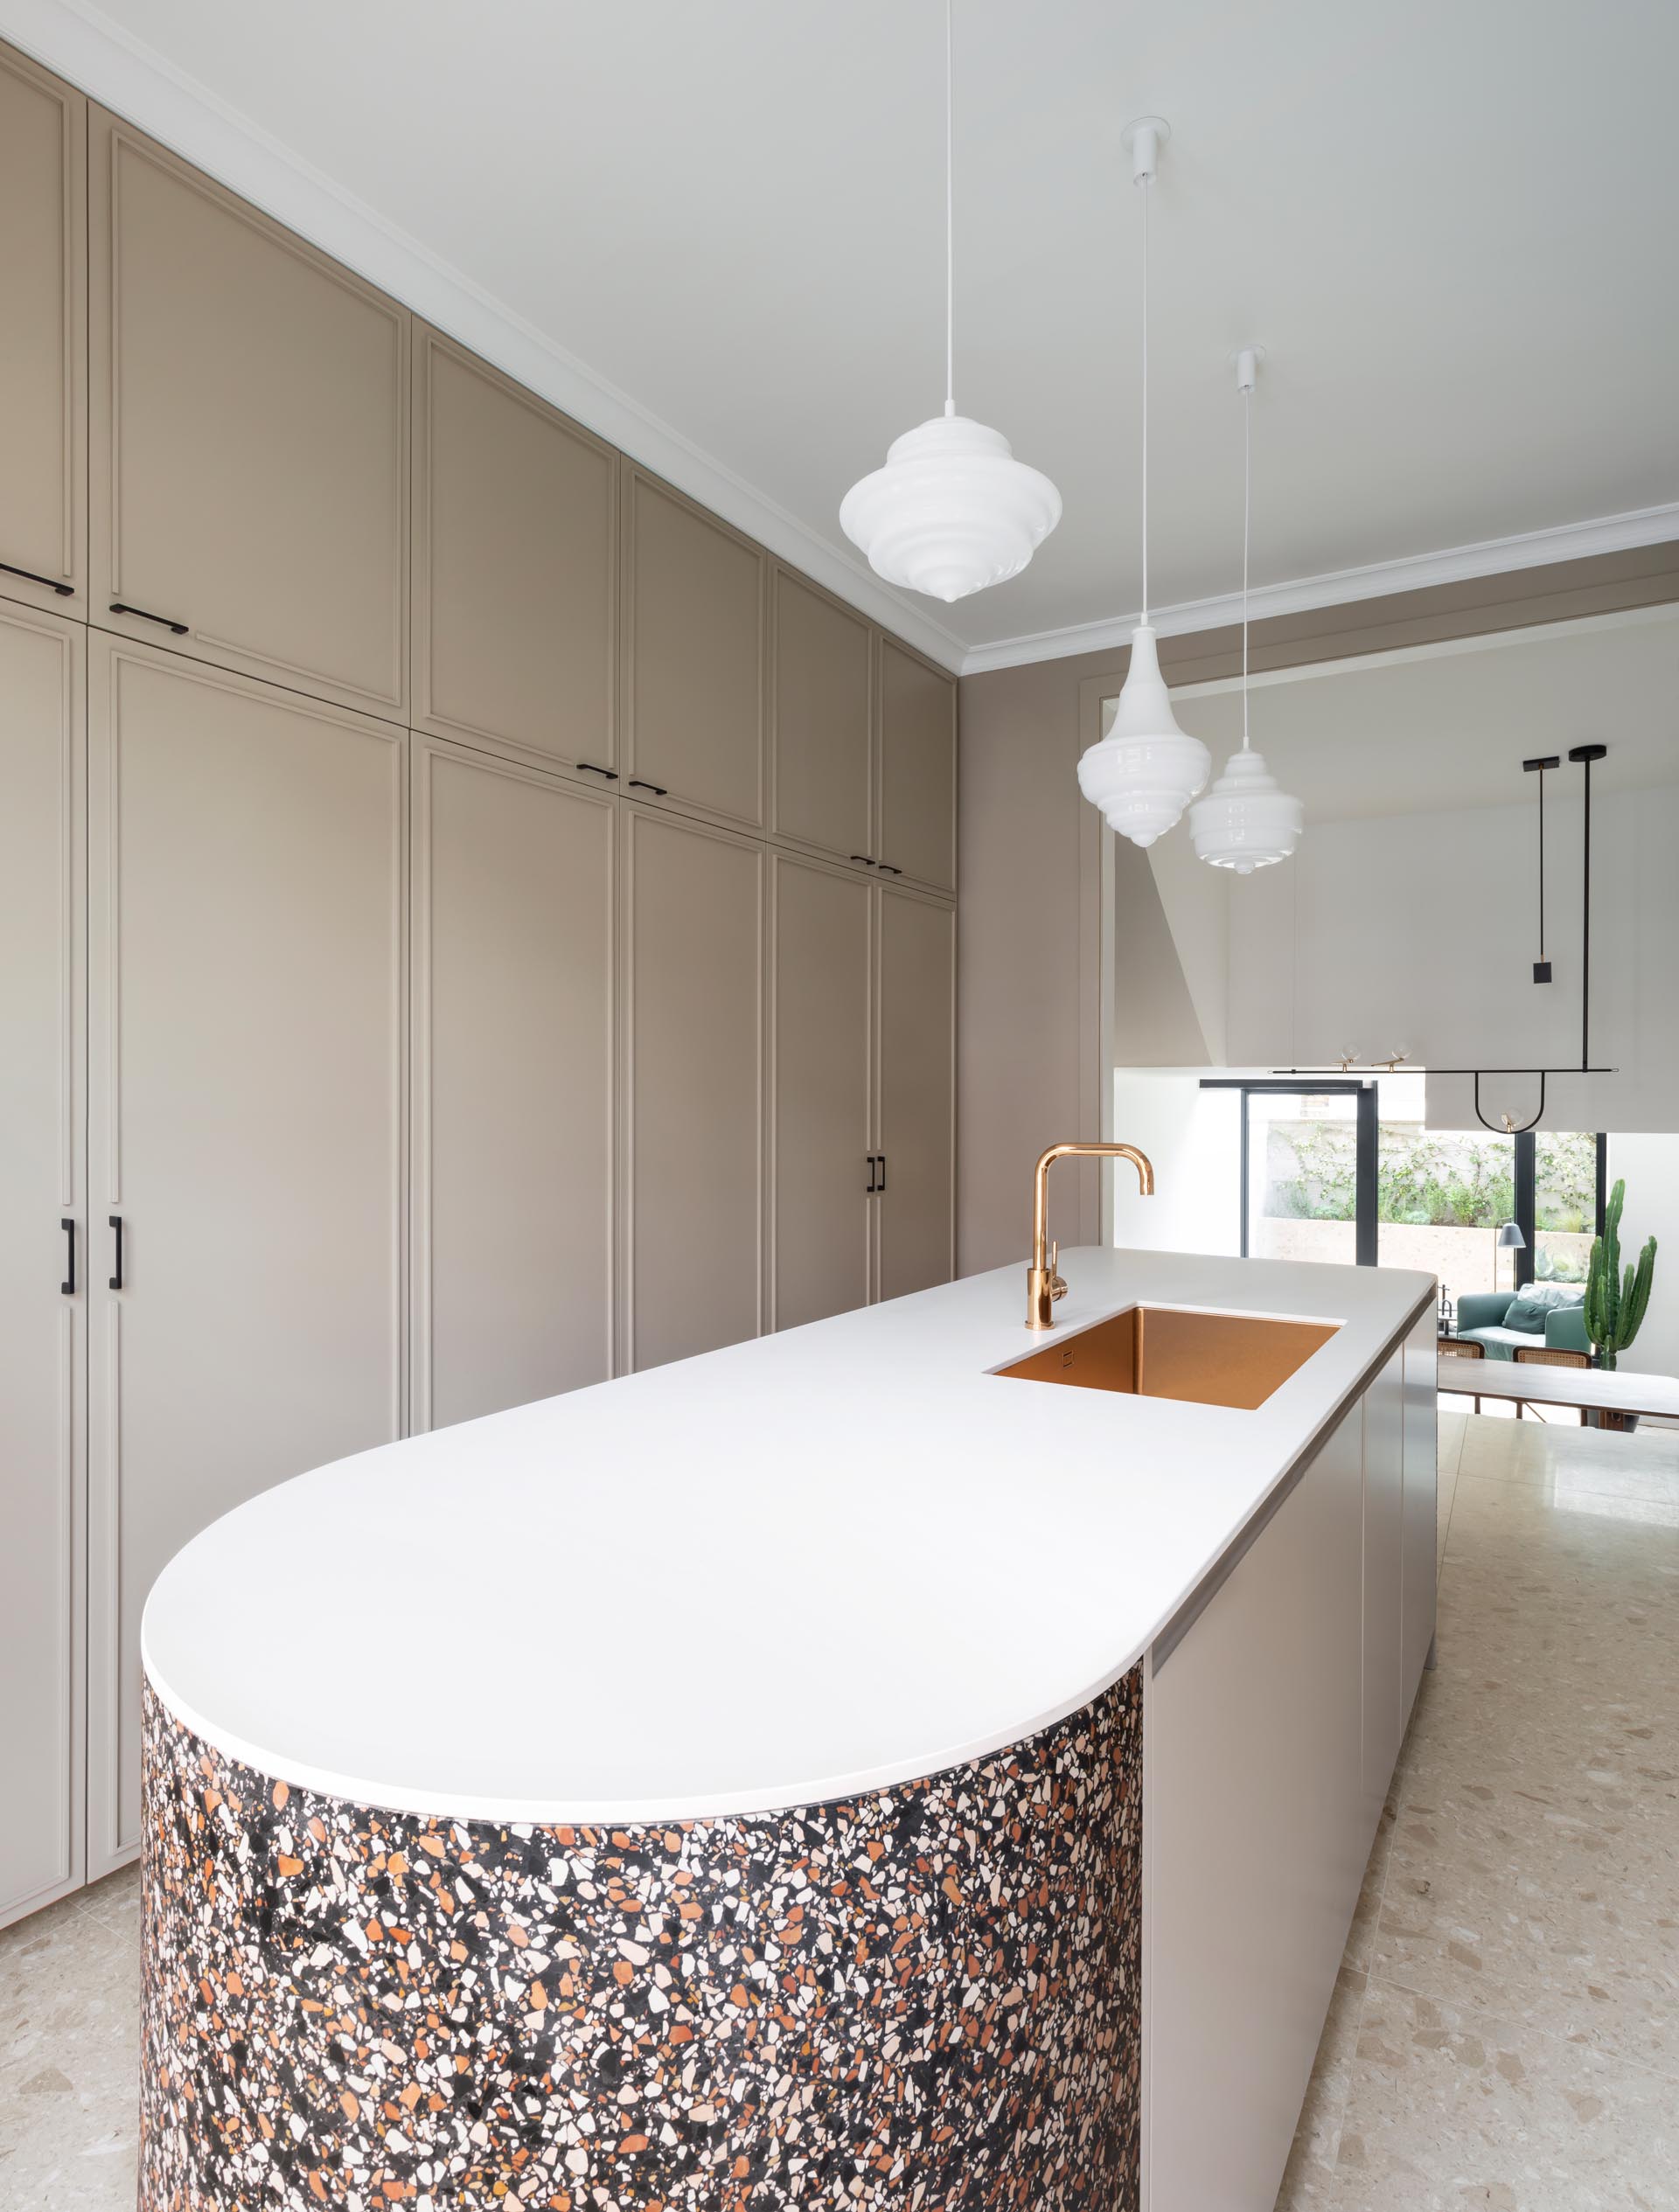 A modern kitchen with tan cabinets, white countertops, and a terrazzo accent.